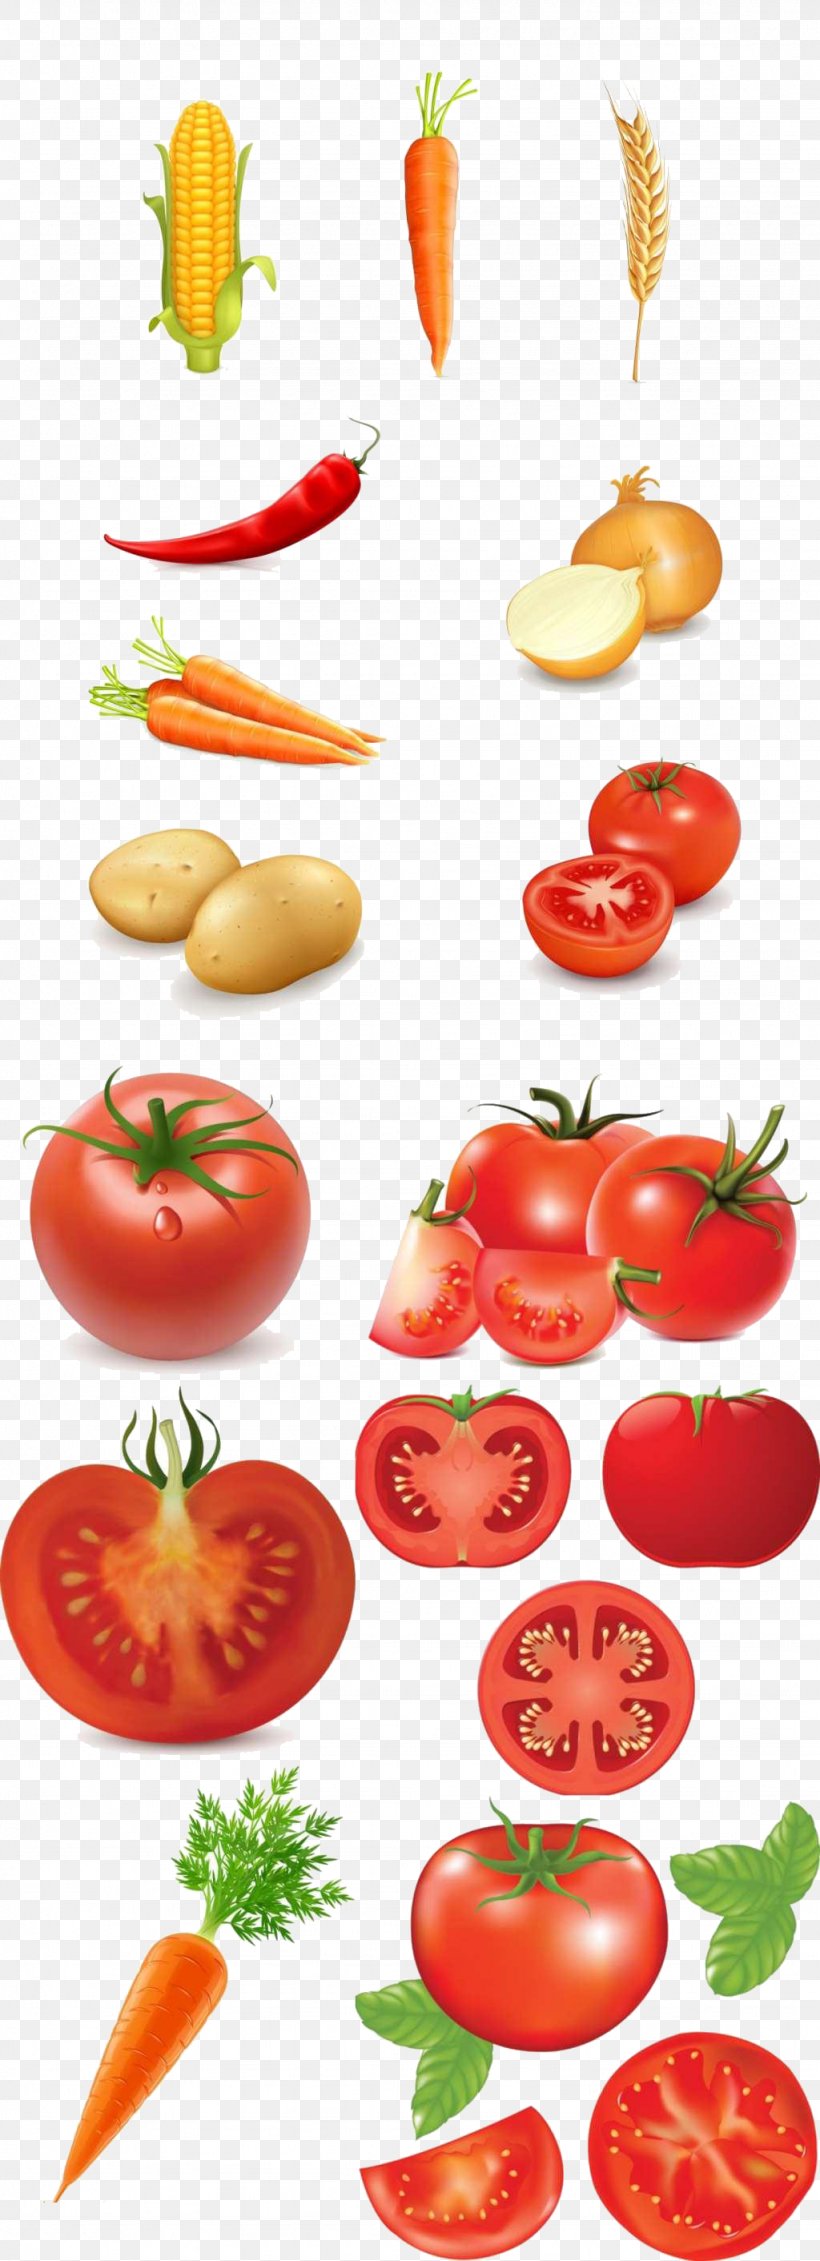 Cherry Tomato Stir-fried Tomato And Scrambled Eggs Vegetable Food, PNG, 1024x2824px, Cherry Tomato, Auglis, Cabbage, Carrot, Diet Food Download Free